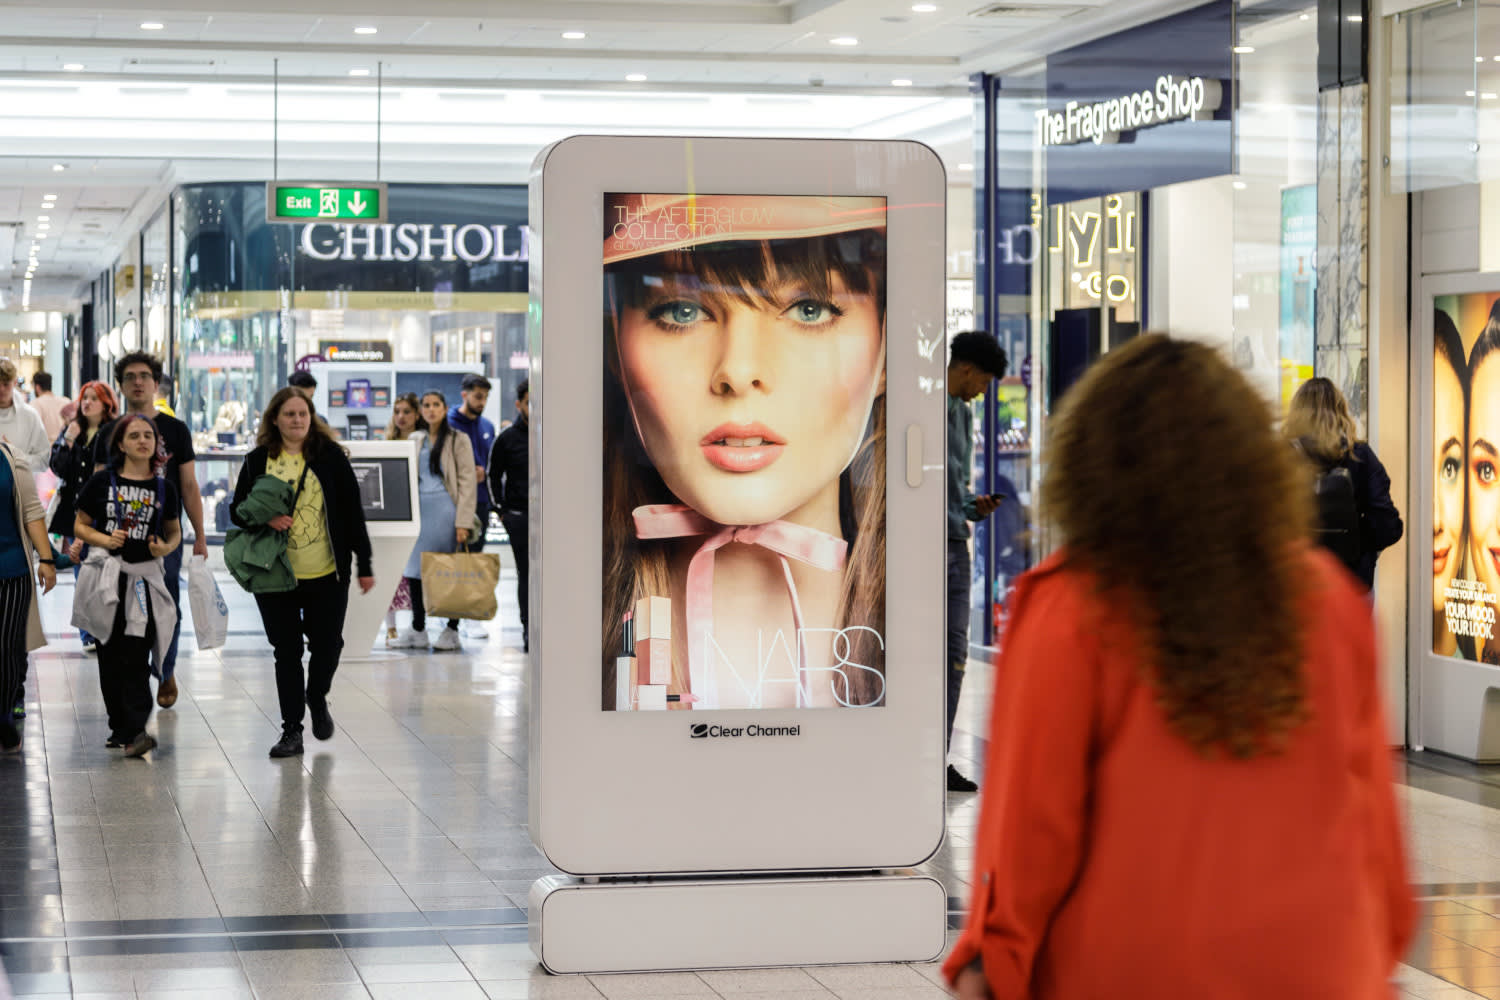 A Malls Live digital screen inside a shopping centre with shoppers walking around